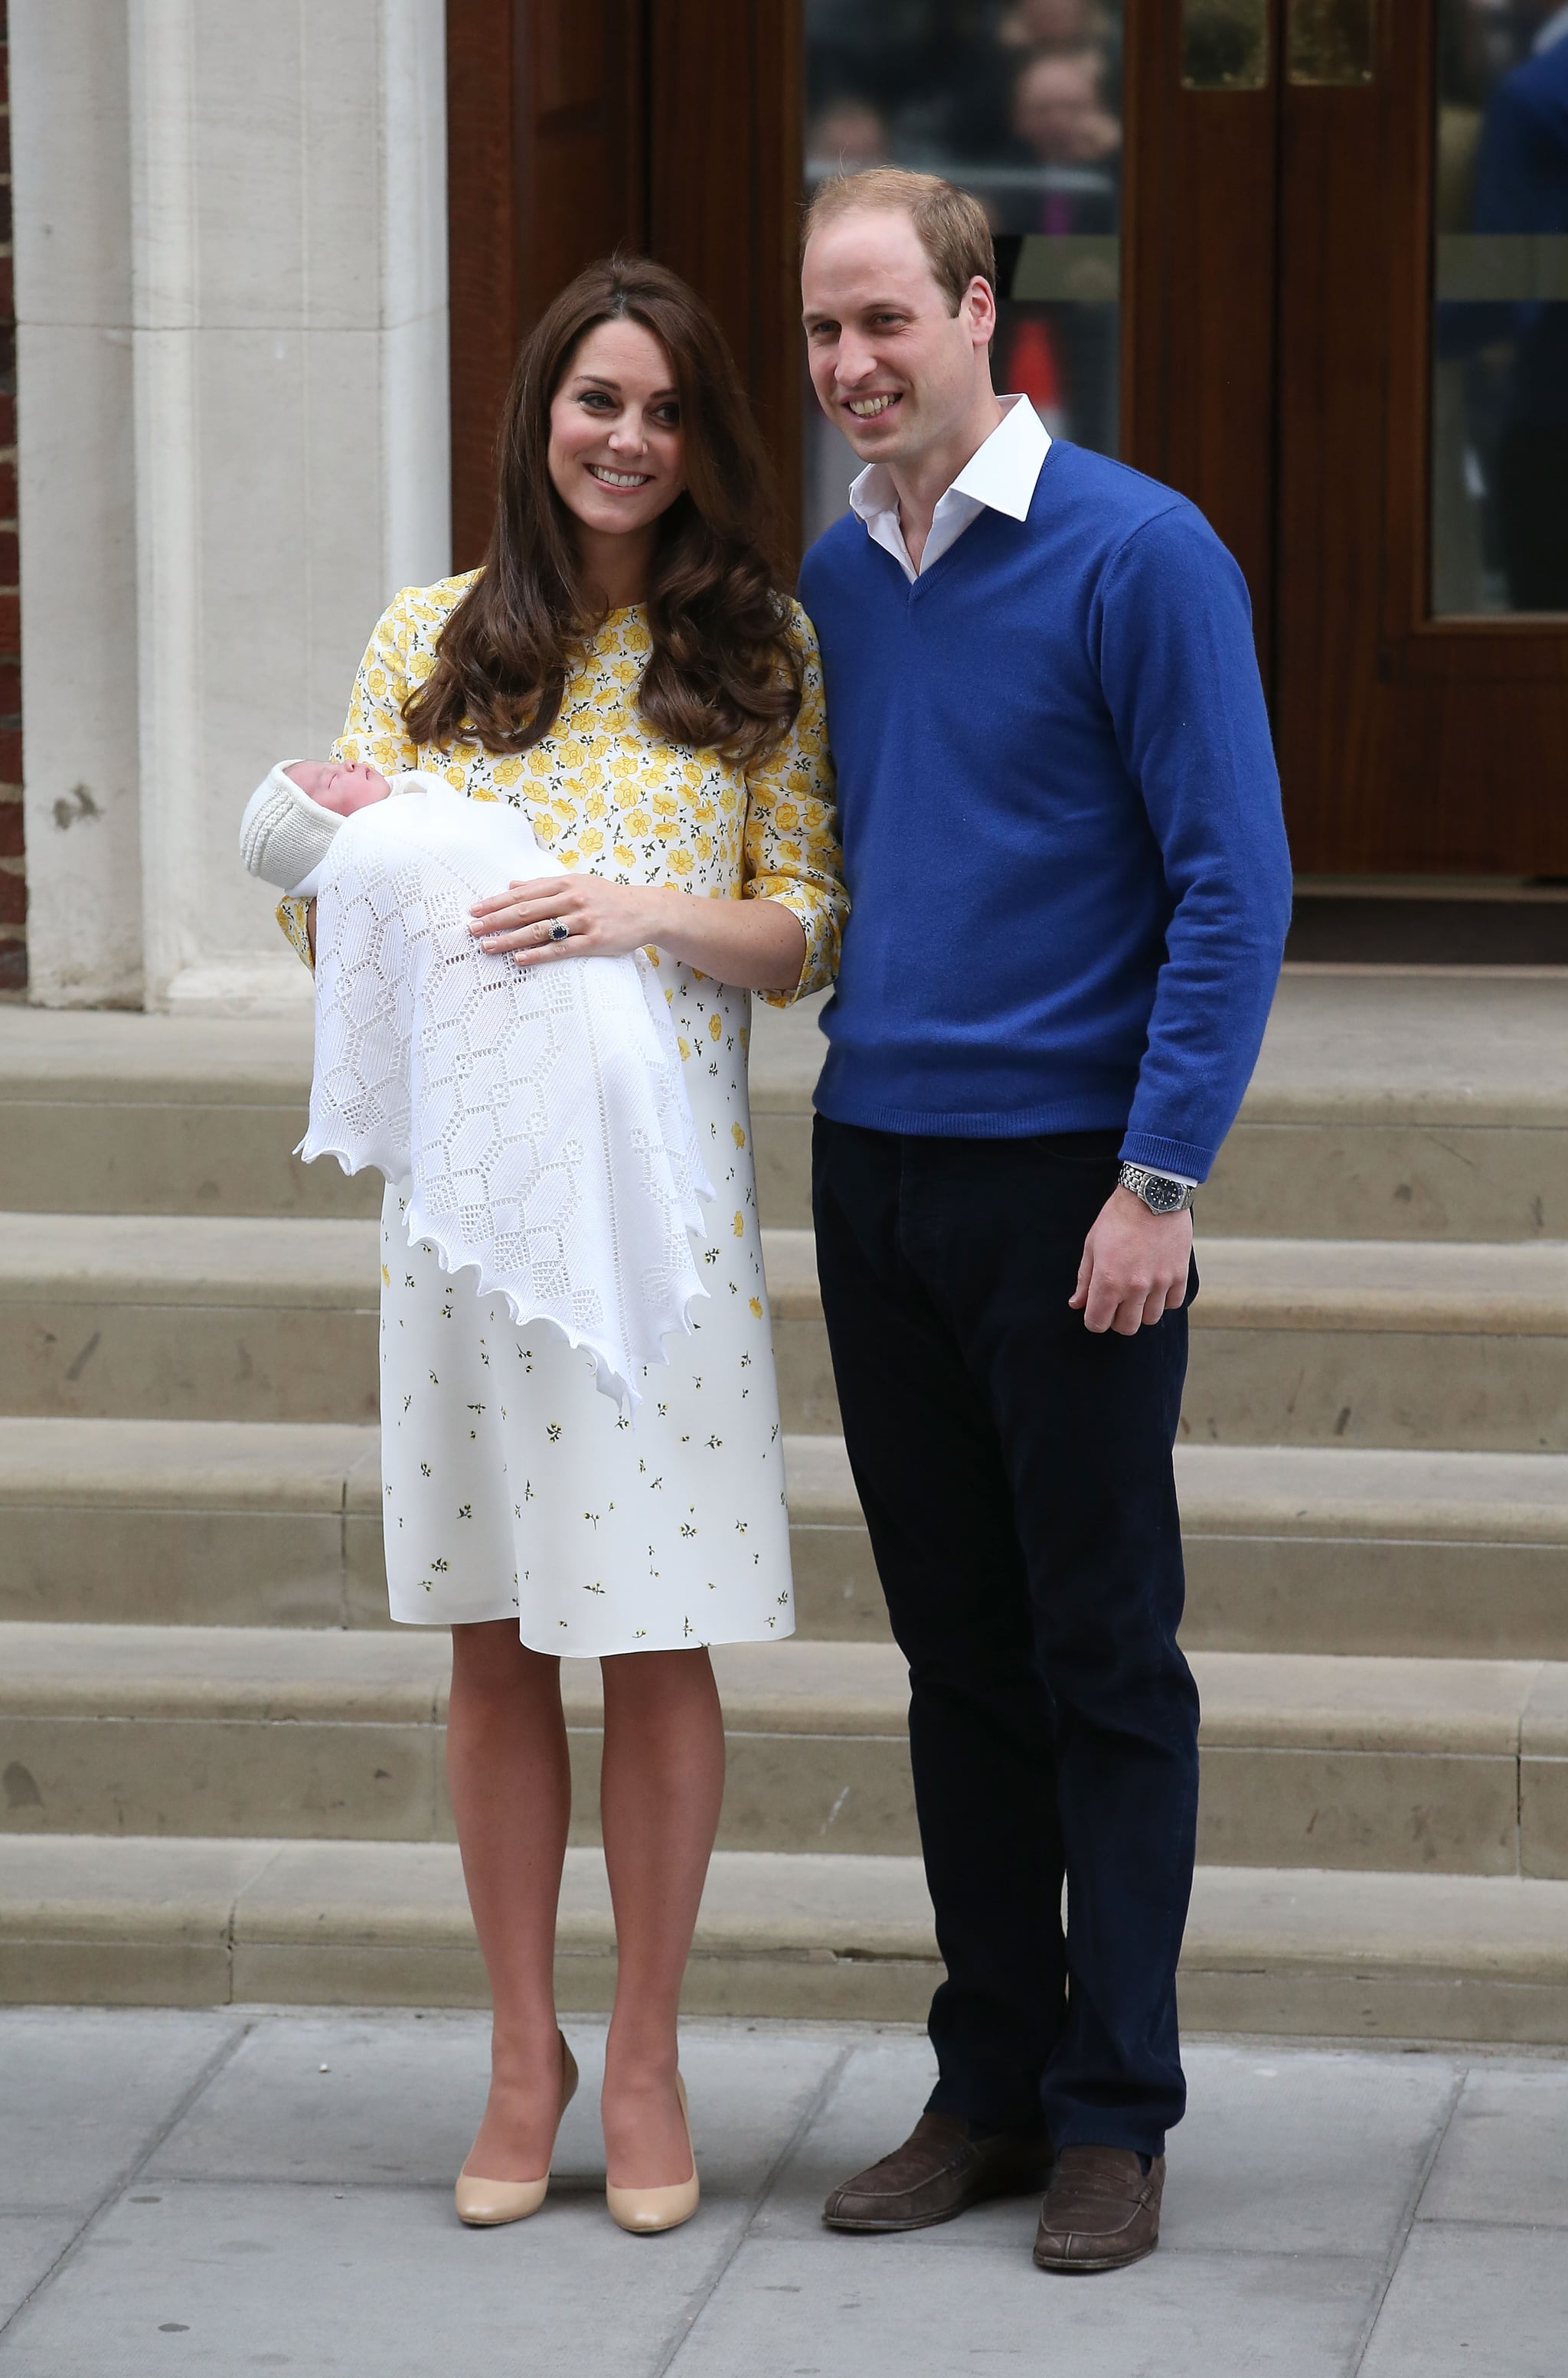 Kate stepped with Prince William and the new baby, looking | See What Kate Wore Leaving the Hospital With Baby Charlotte | POPSUGAR Fashion Photo 2